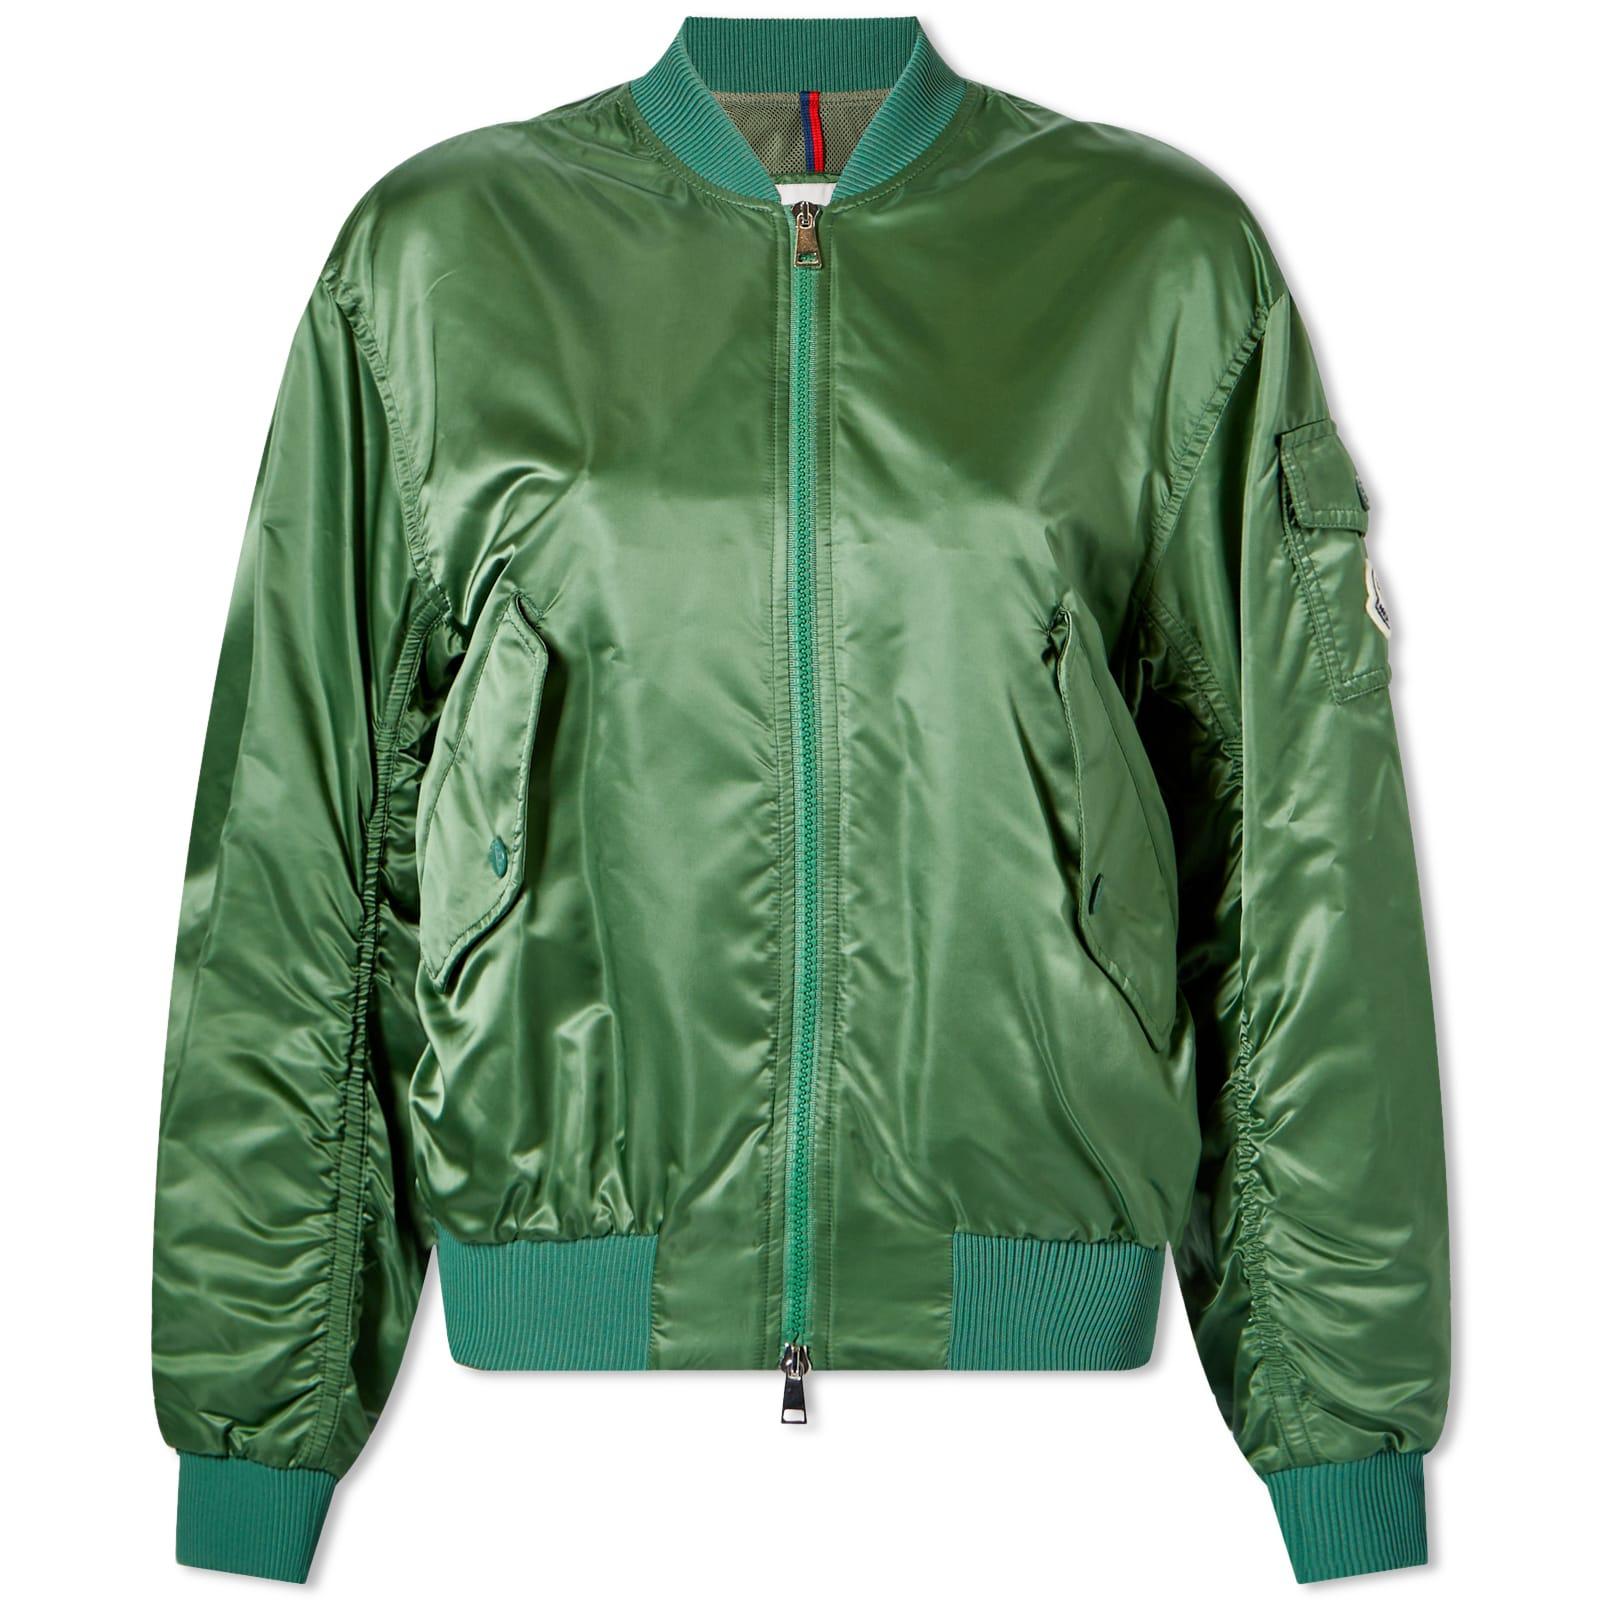 Moncler Ter Bomber Jacket in Green | Lyst